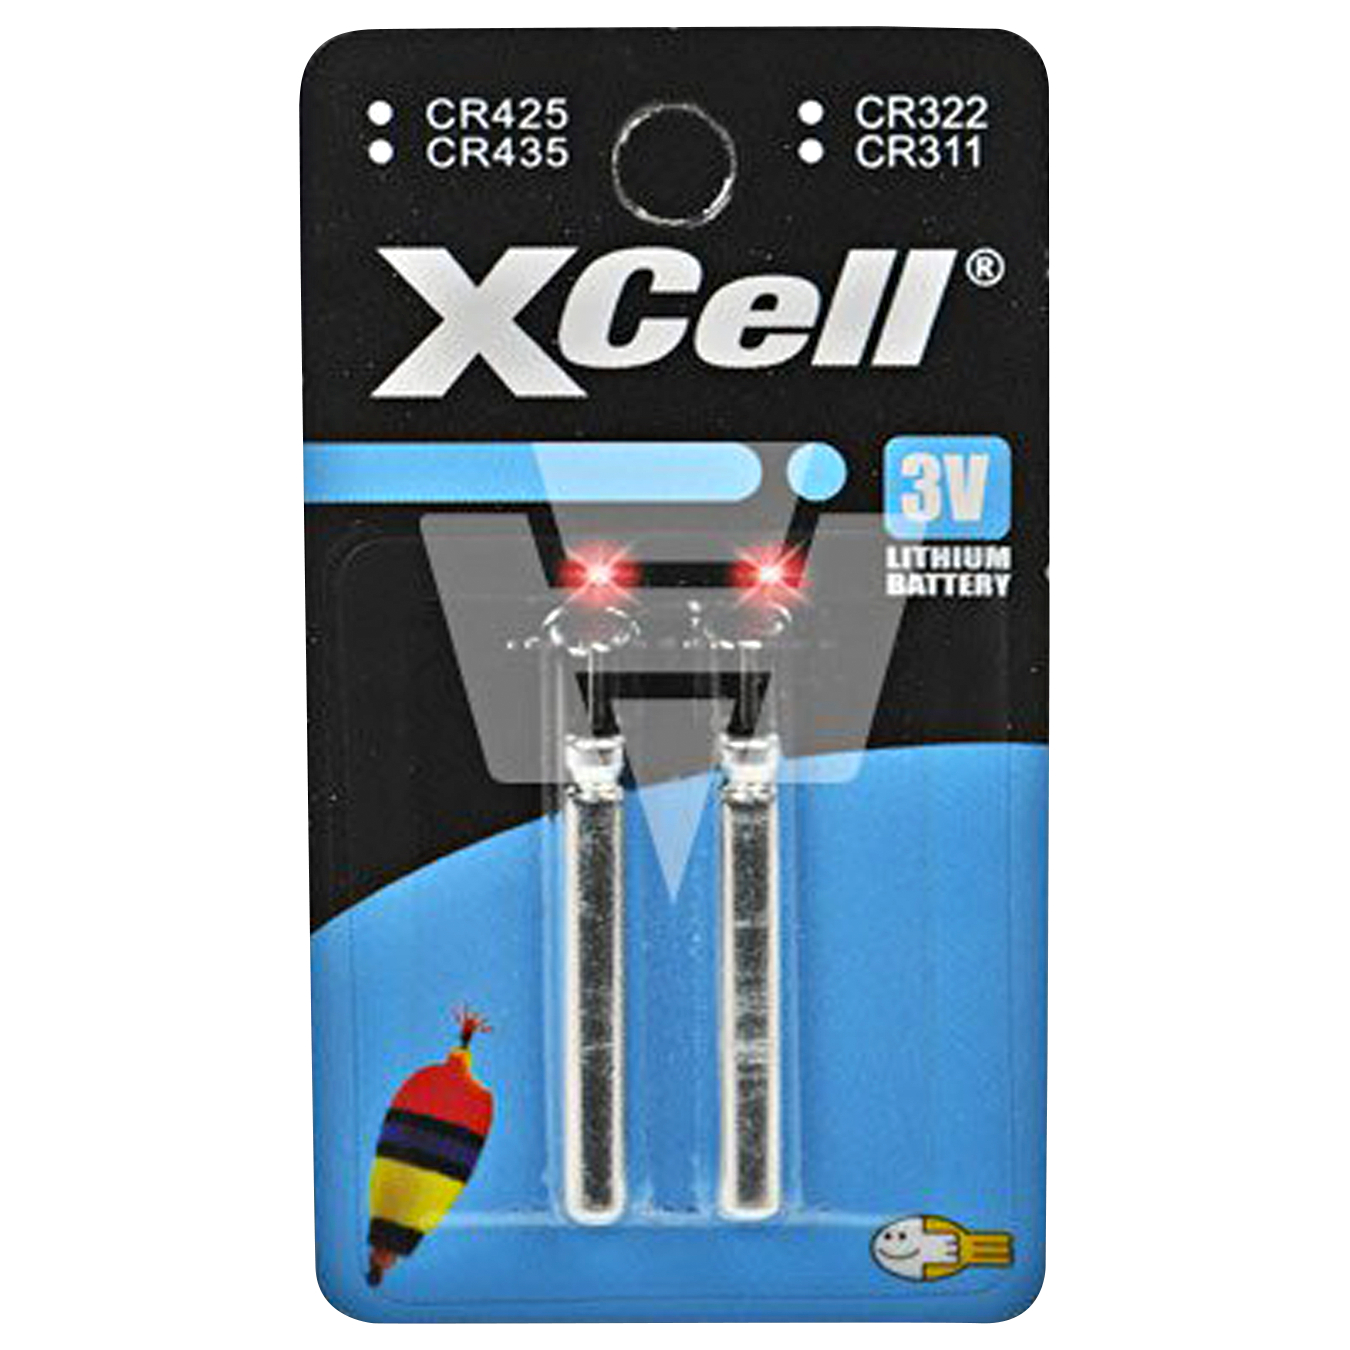 XCell Lithium Battery electronics CR435 